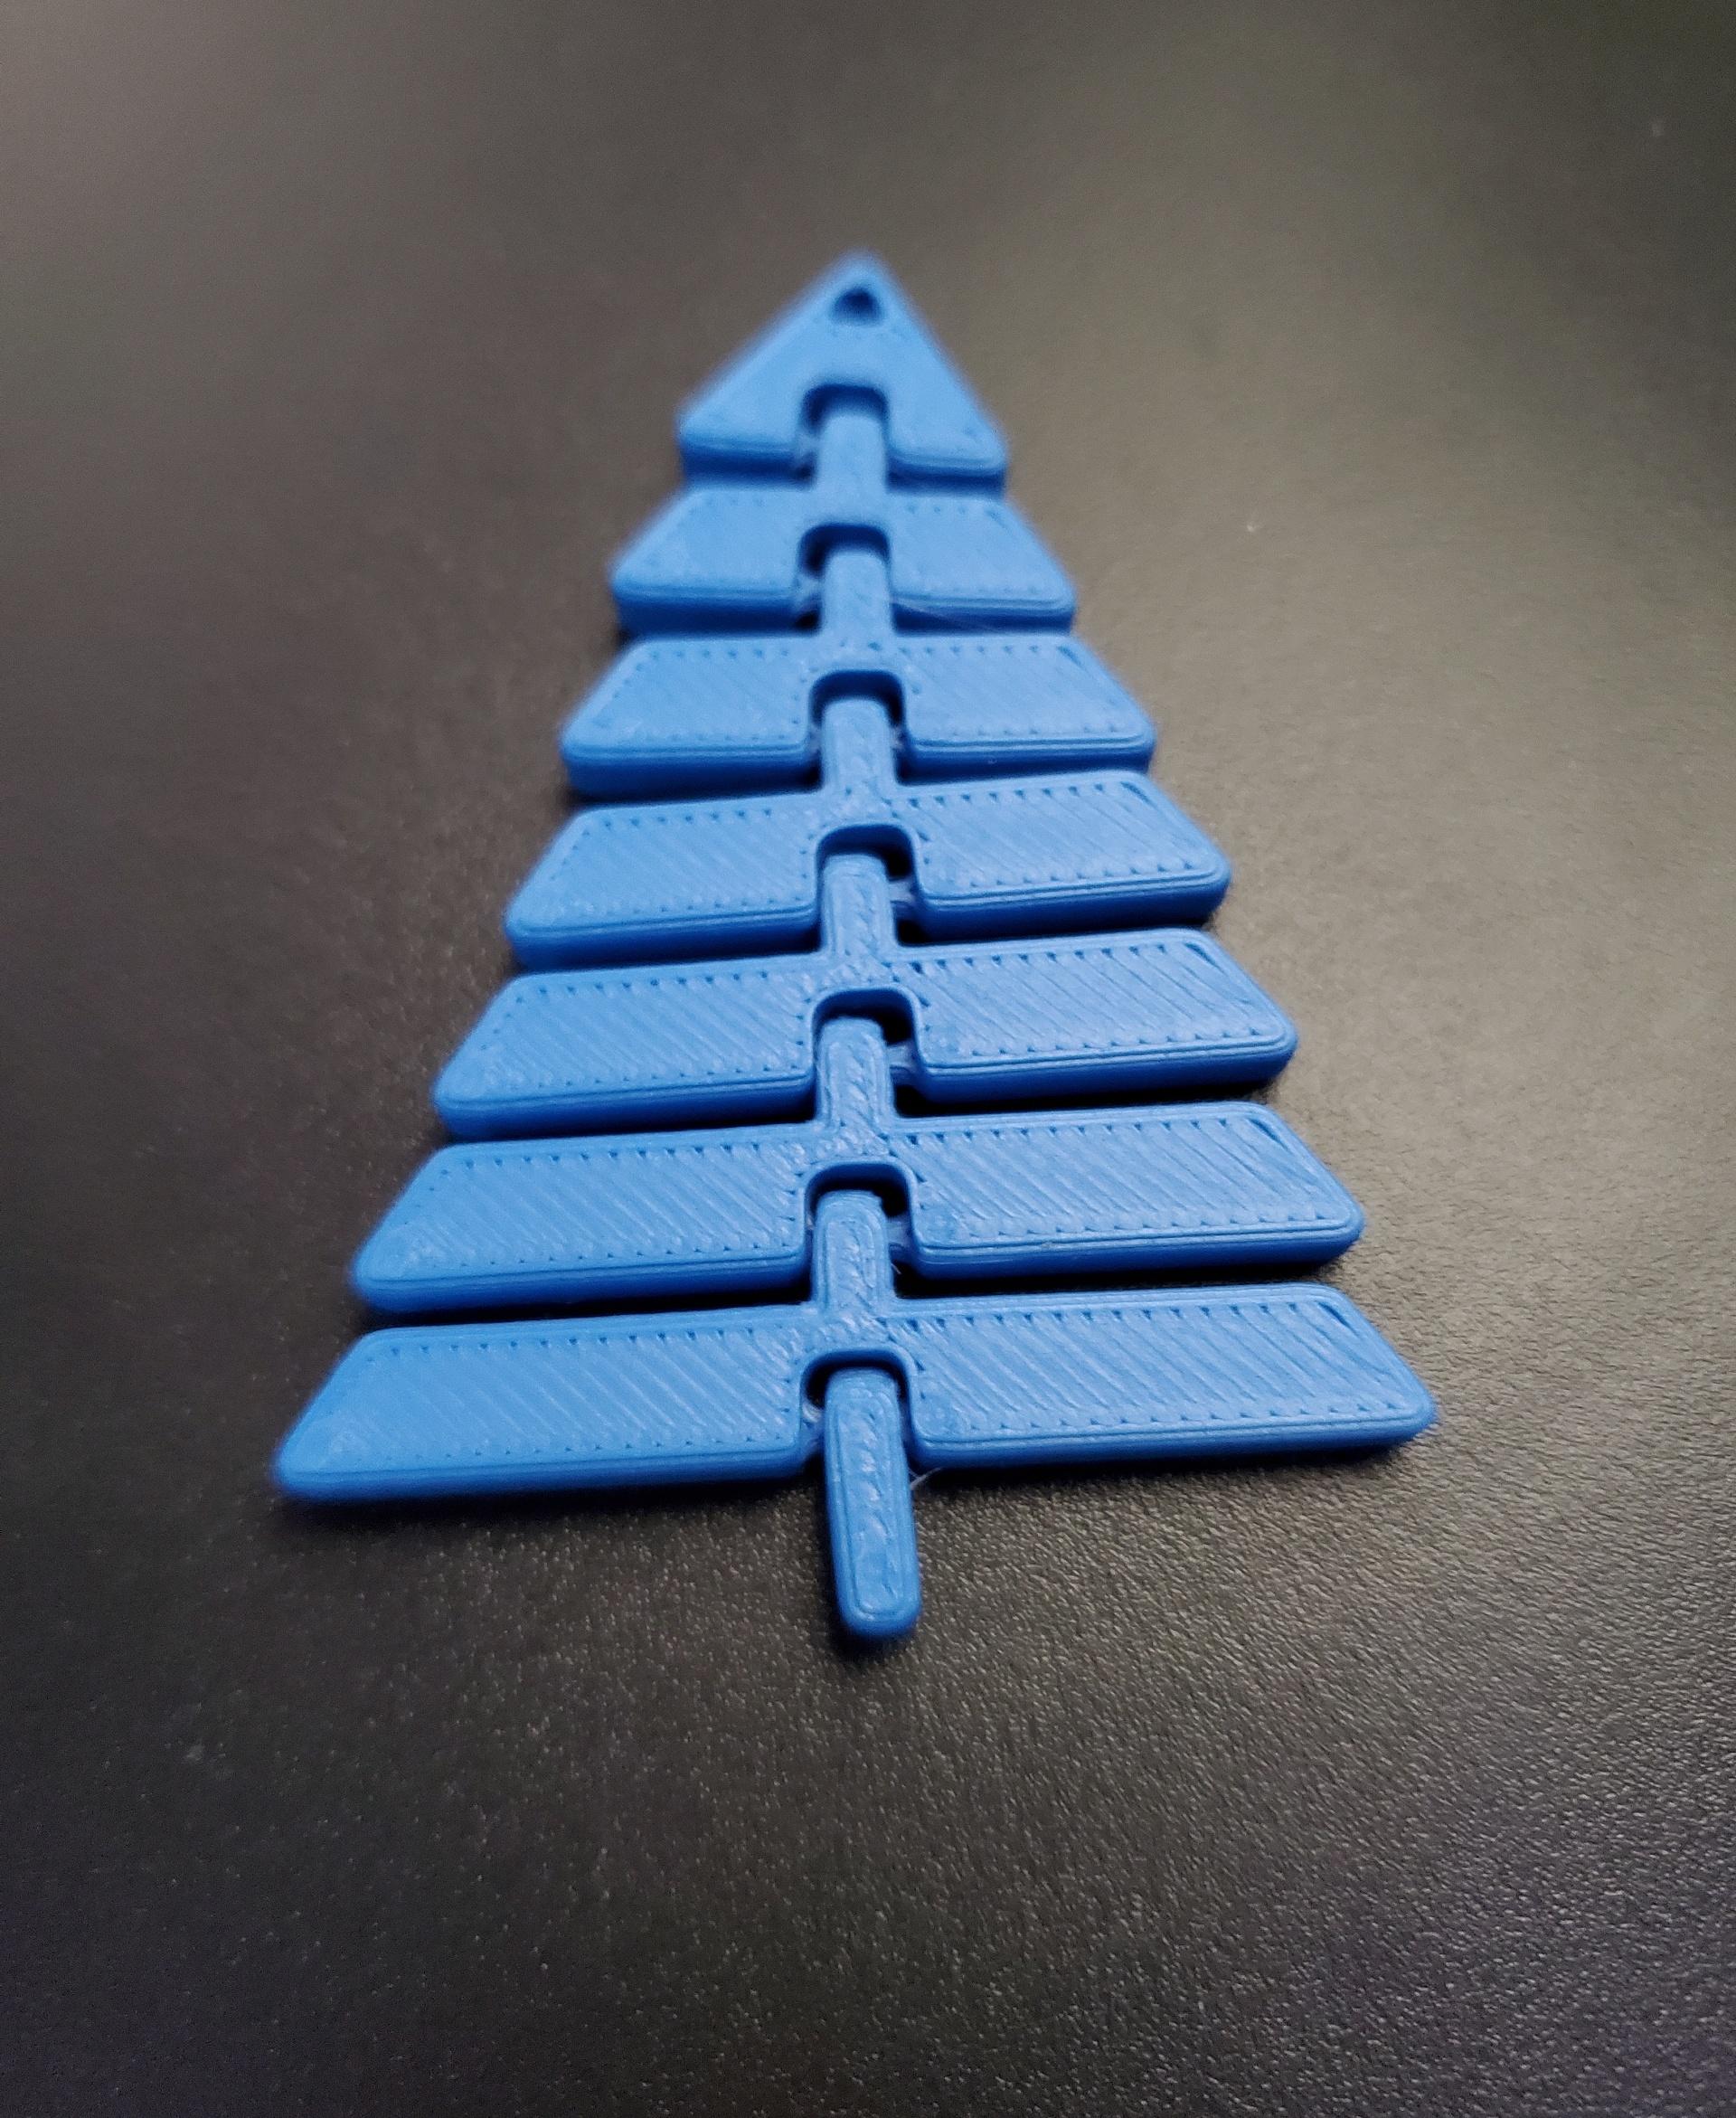 Articulated Christmas Tree Keychain - Print in place fidget toy - polyterra sapphire blue - 3d model